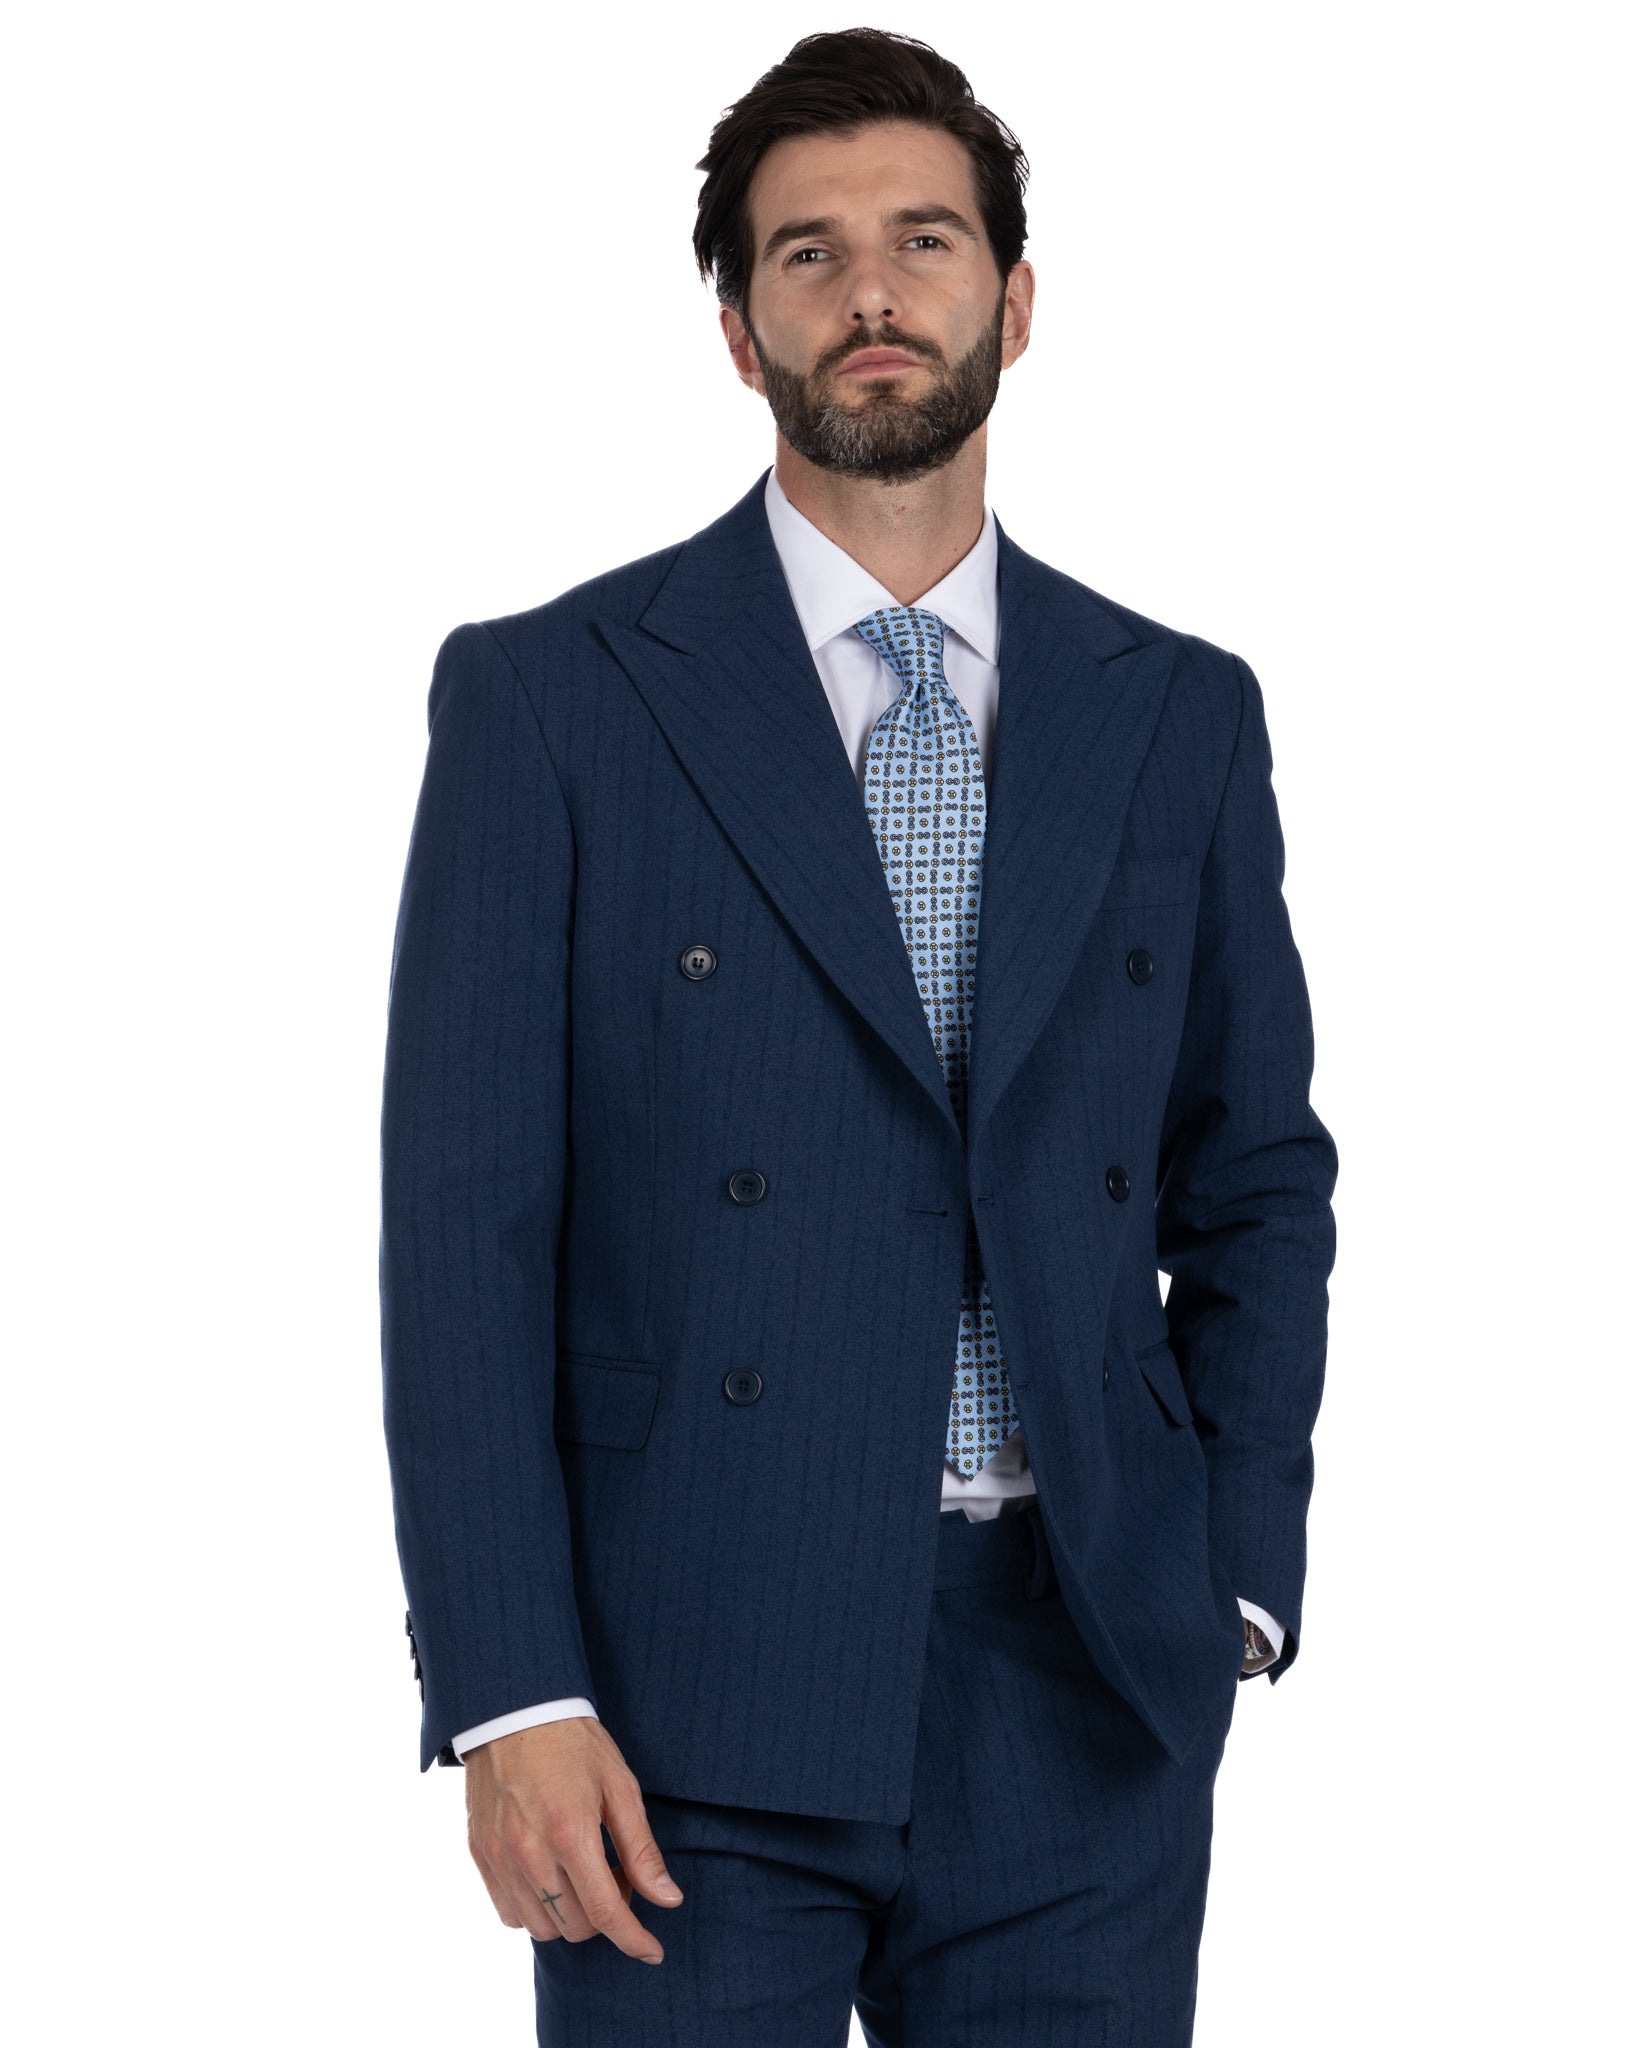 Enzo - double-breasted blue pinstriped suit